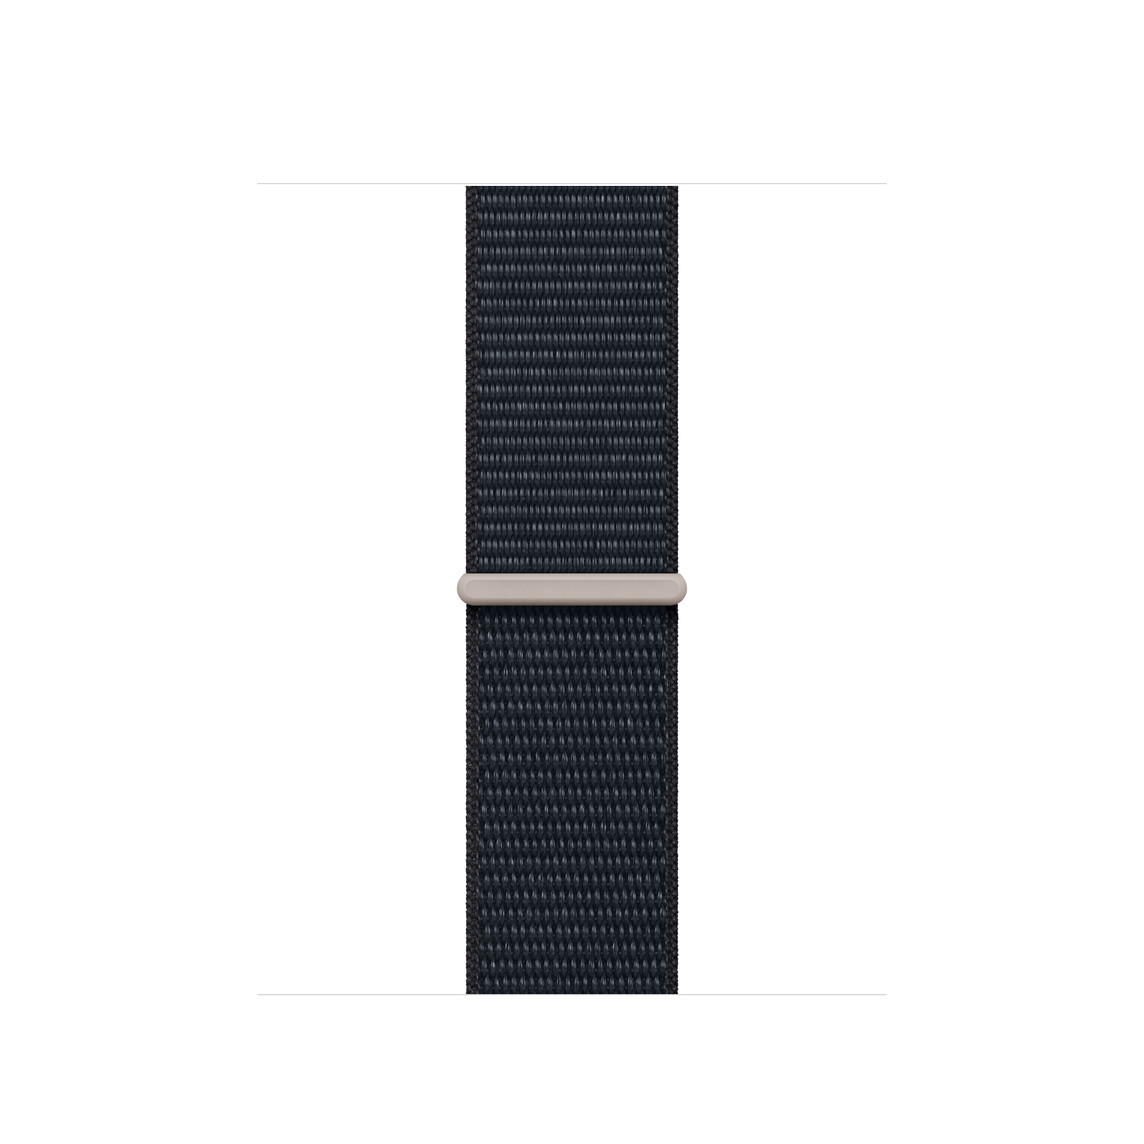 Midnight Sport Loop band, dark blue woven nylon with light blue and brown stripes, hook-and-loop fastener